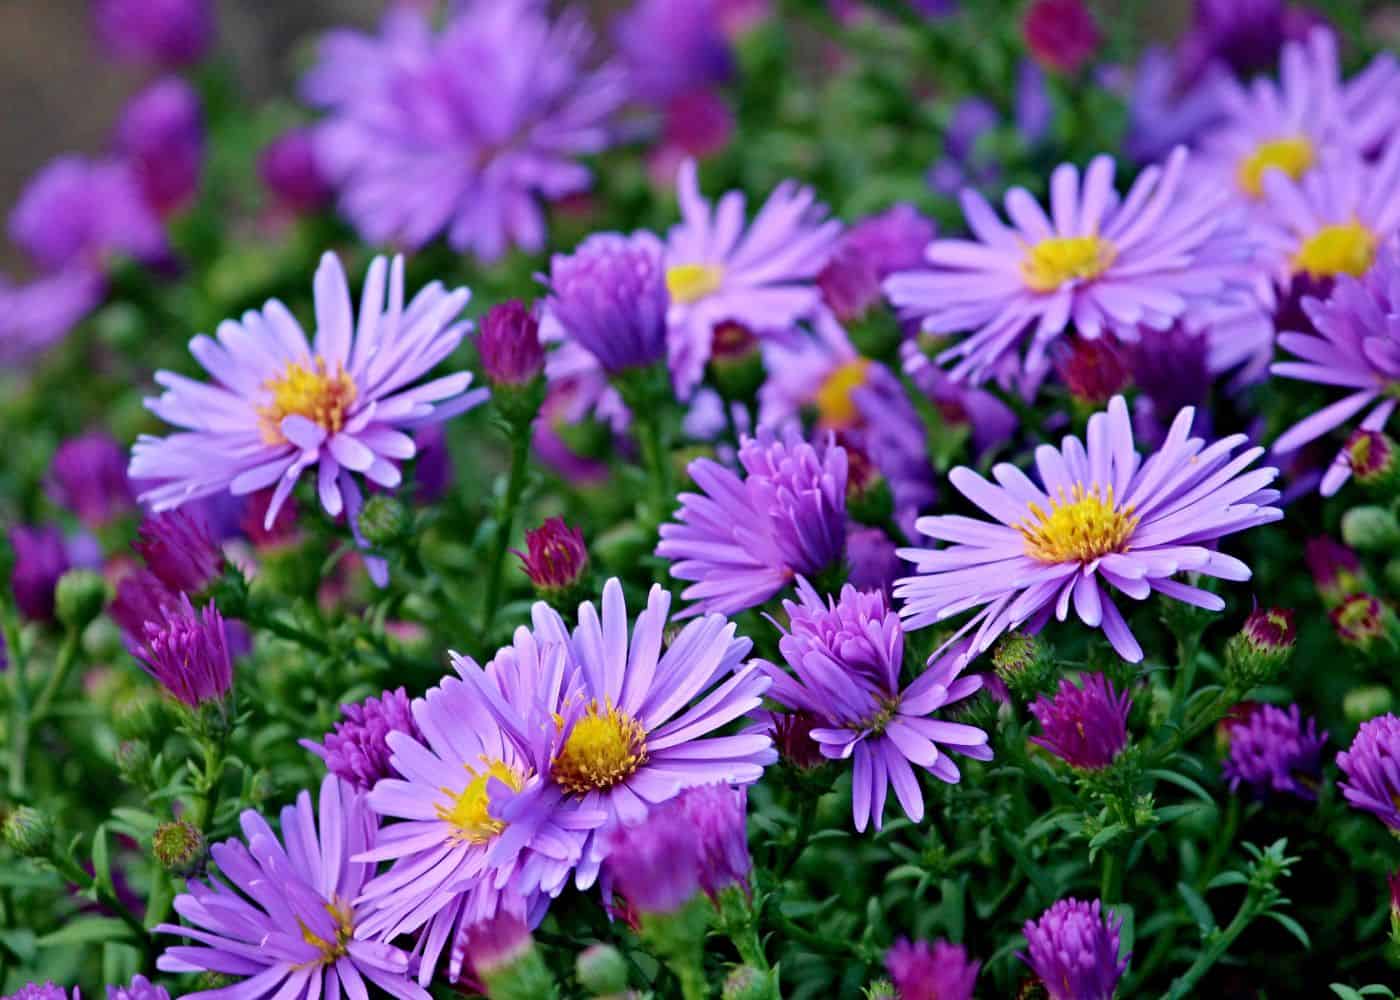 Fall asters in bloom